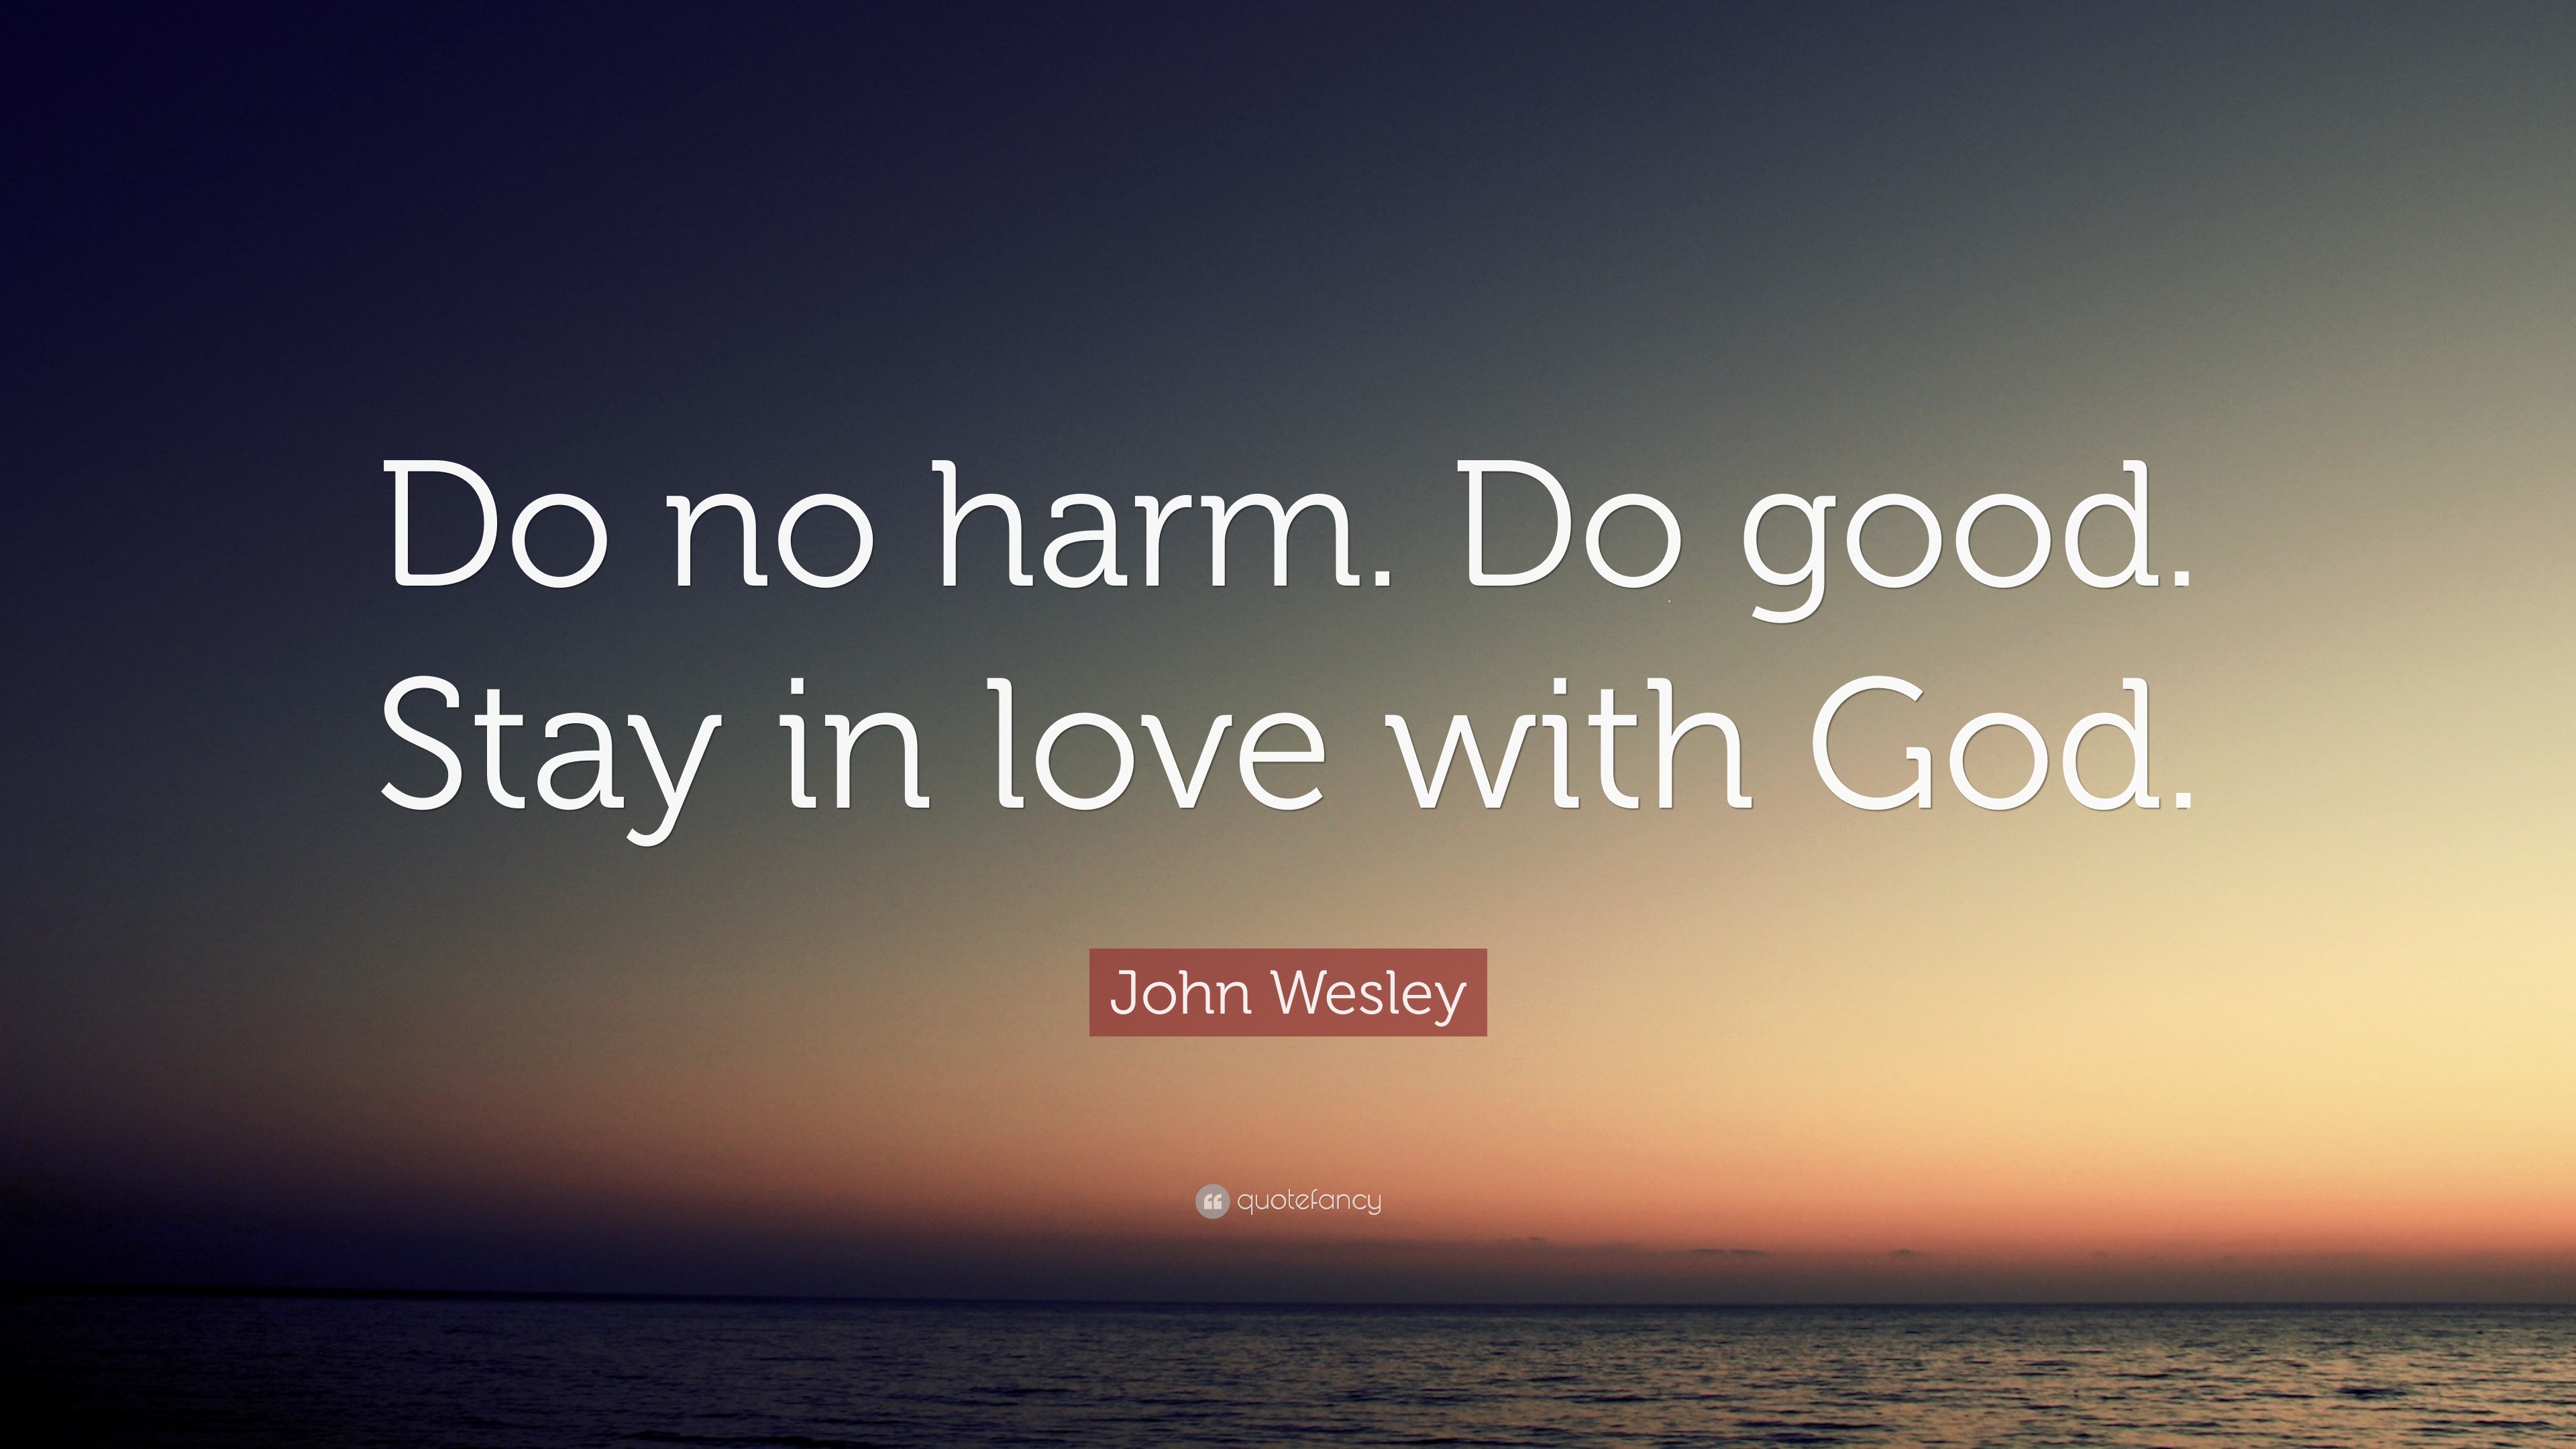 John Wesley Quote “Do no harm Do good Stay in love with